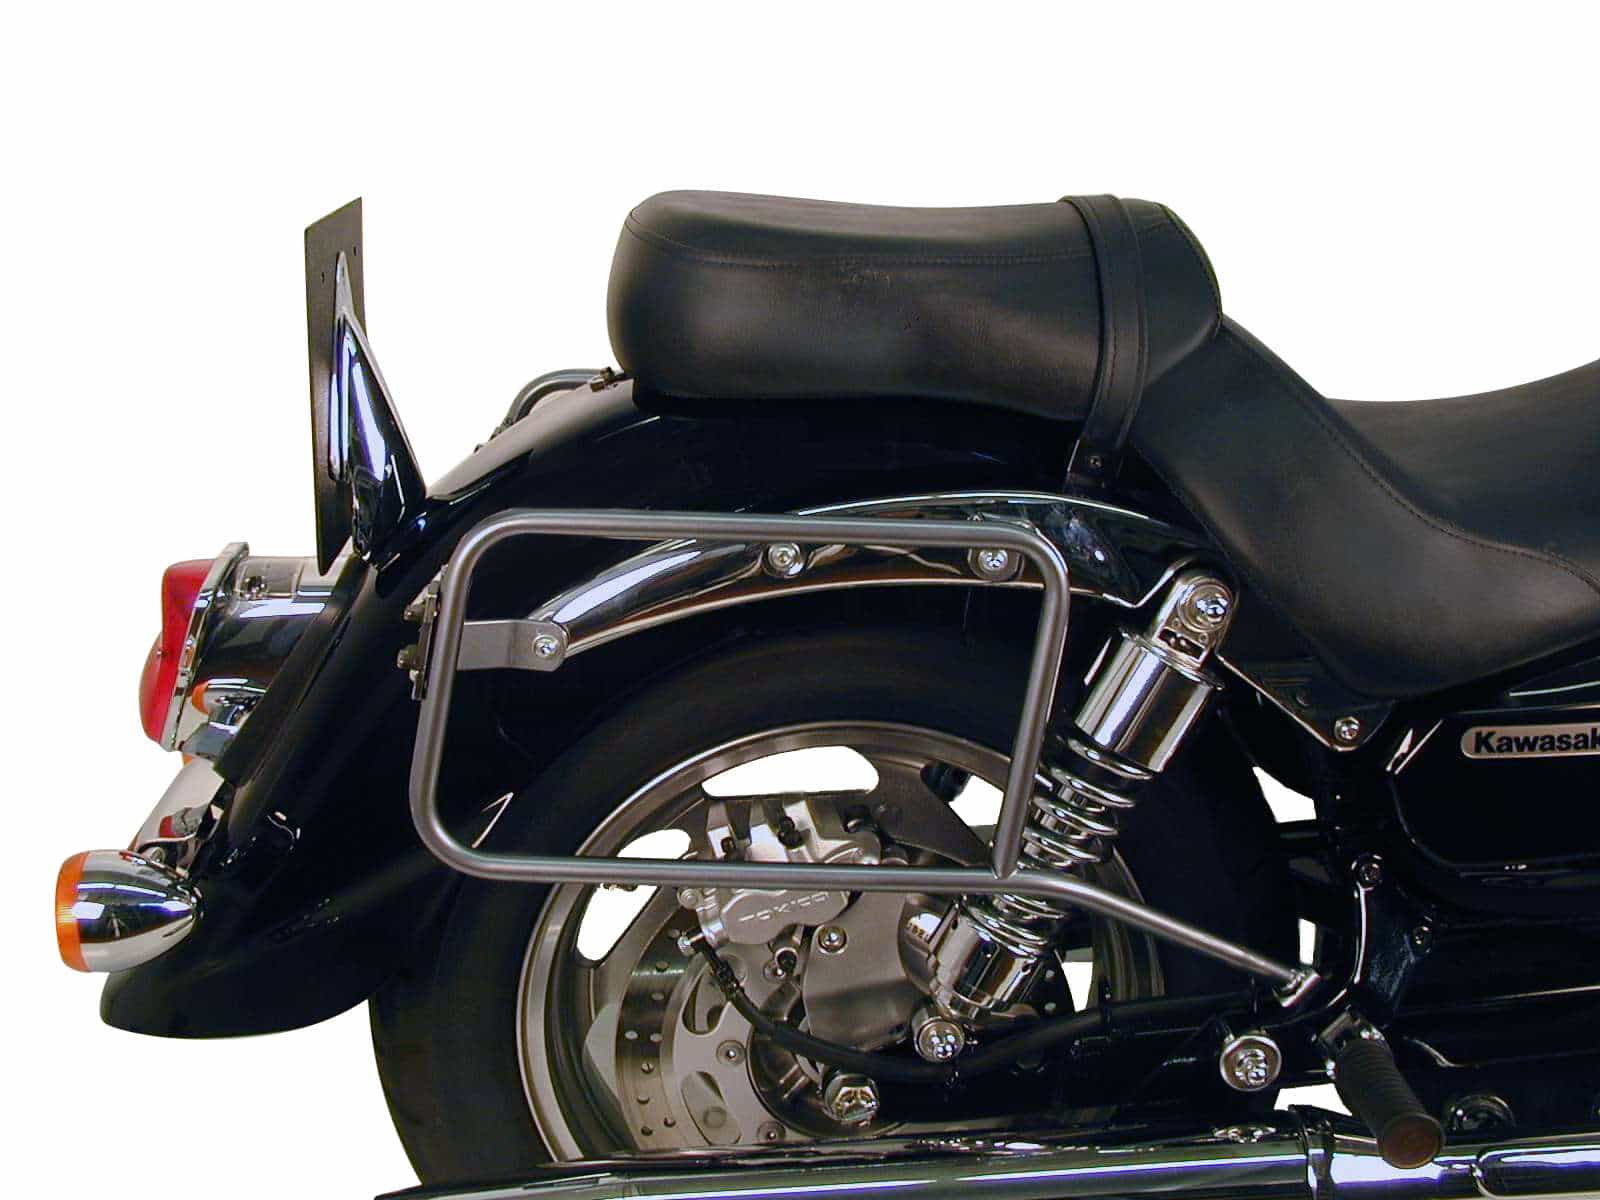 Sidecarrier permanent mounted chrome for Kawasaki VN 1600 Classic (2003-2008)